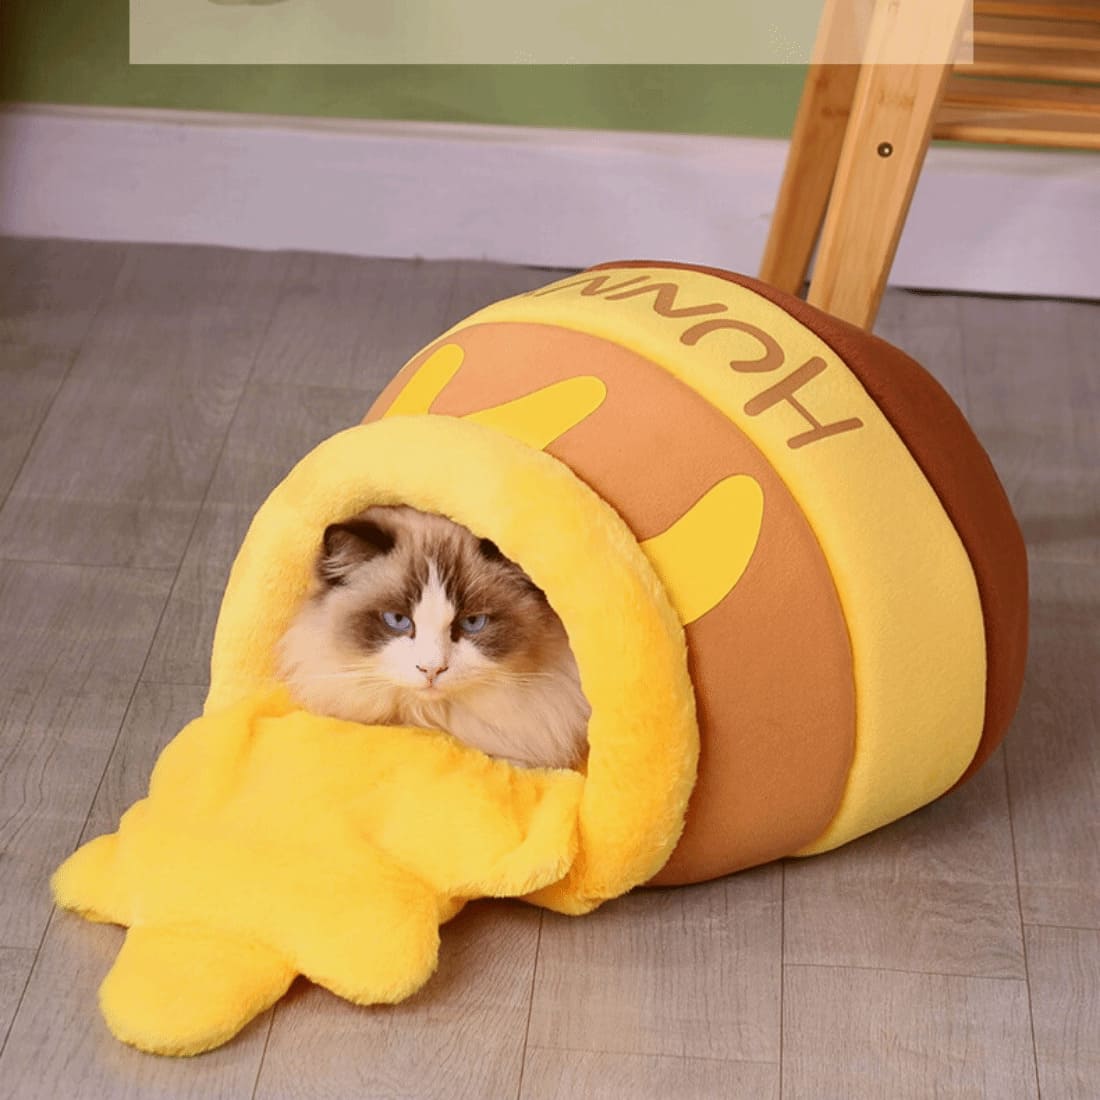 a cat hiding inside a hunny pot shape cat bed in yellow color and looks so adorable just like honey was spilt over